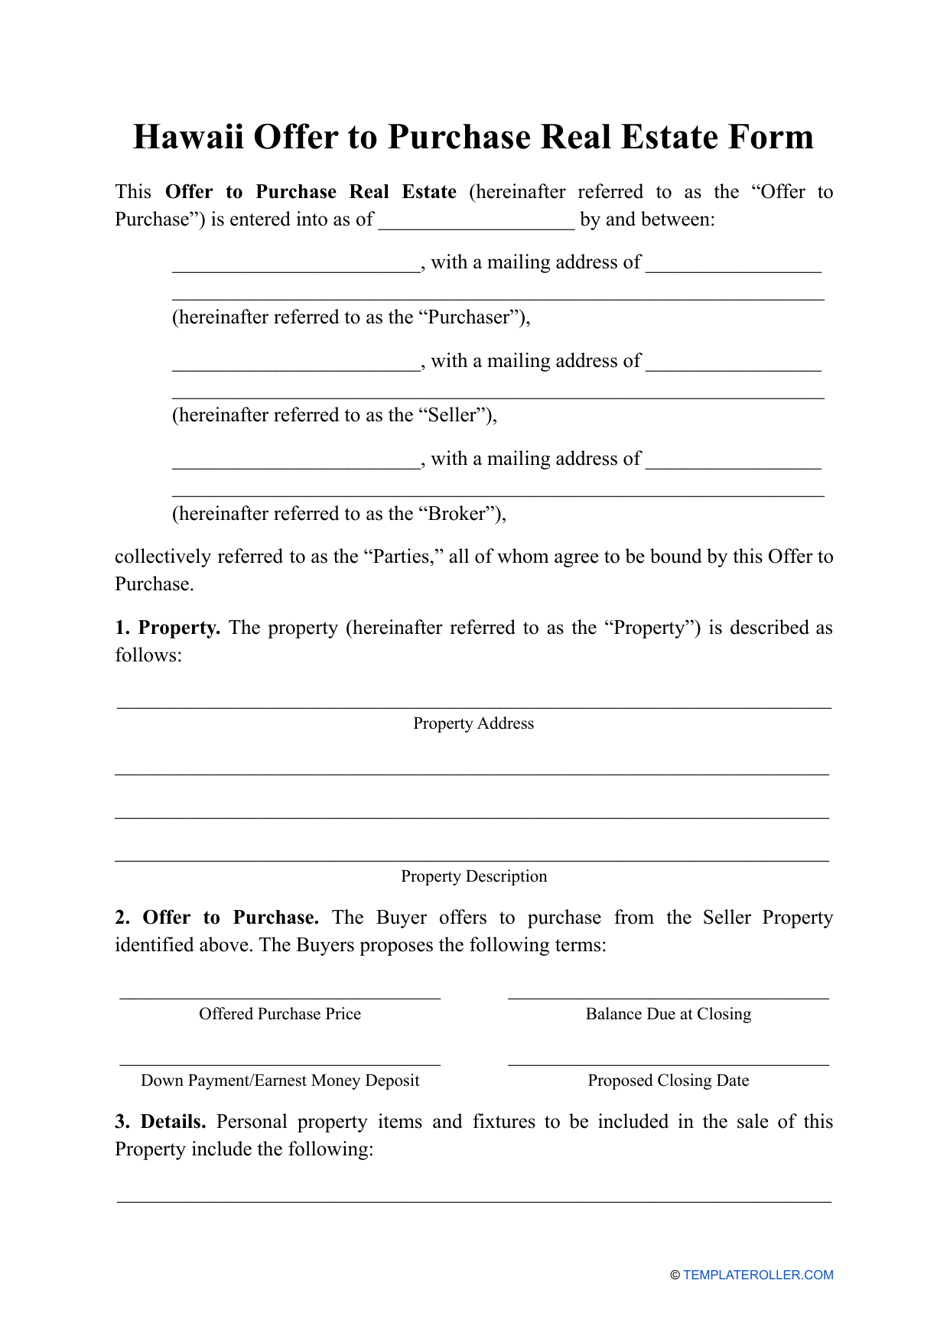 Offer to Purchase Real Estate Form - Hawaii, Page 1